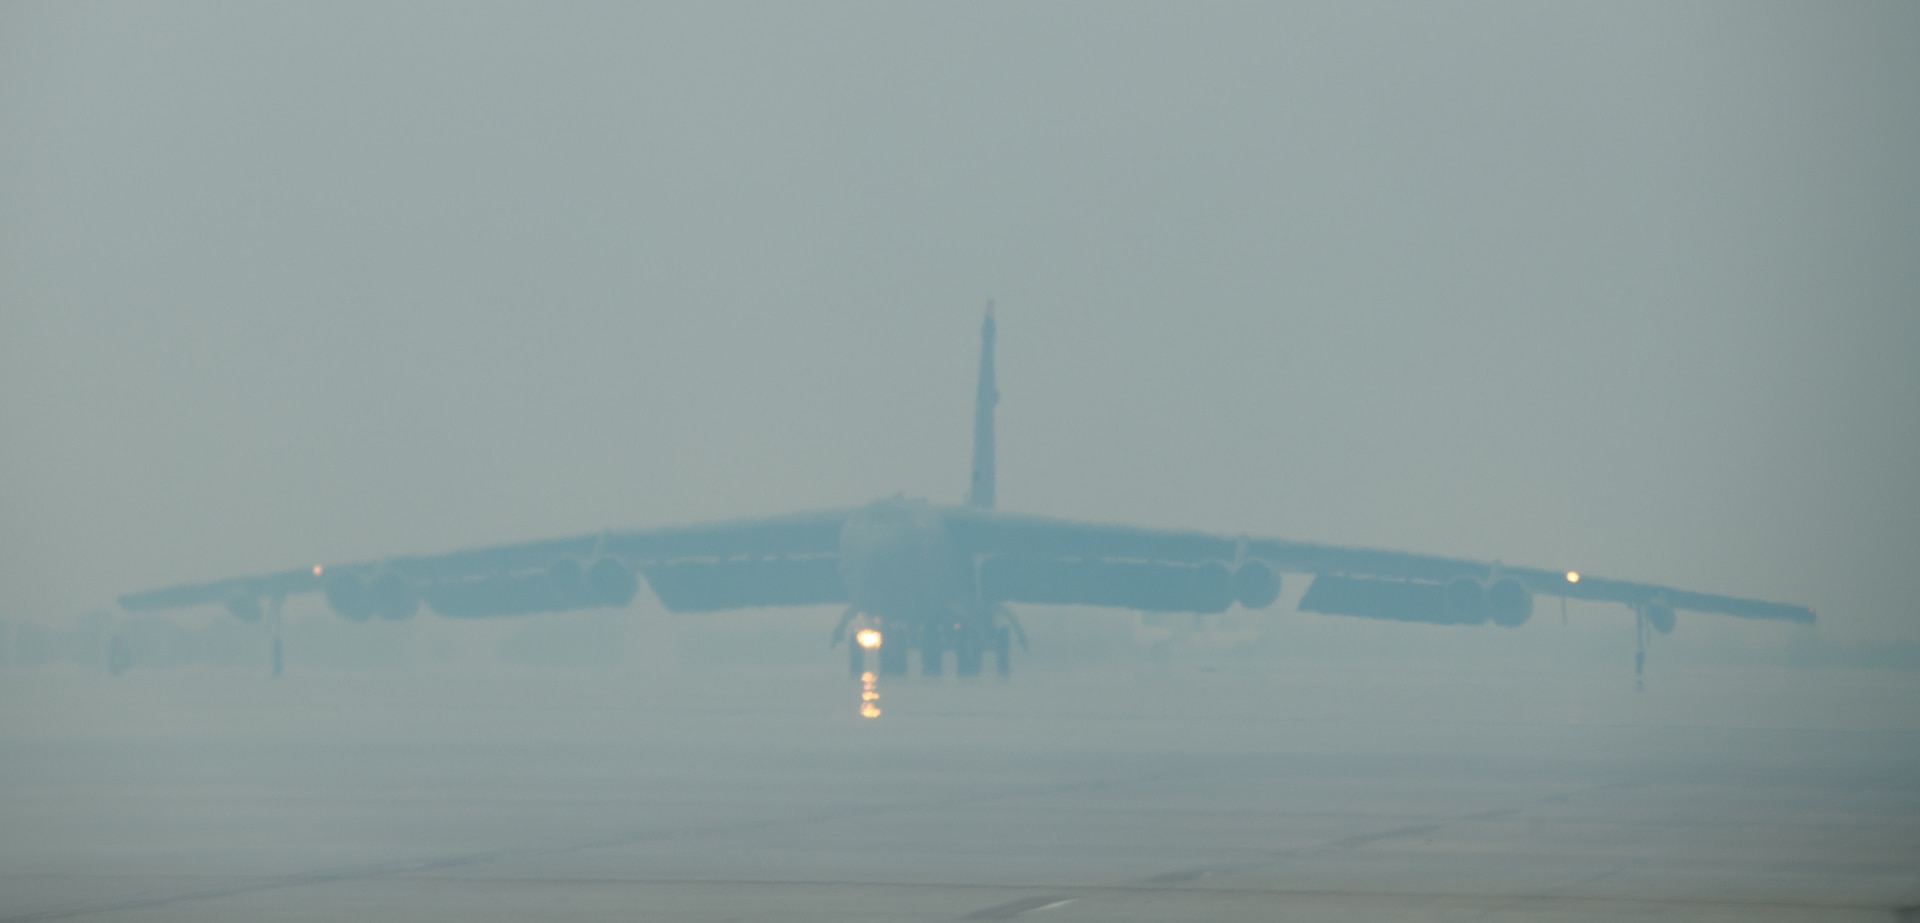 A B-52H Stratofortress  on the flightline on Nov. 20, 2020, at Minot Air Force Base, North Dakota. (U.S. Air Force photo by Airman 1st Class Jesse Jenny)